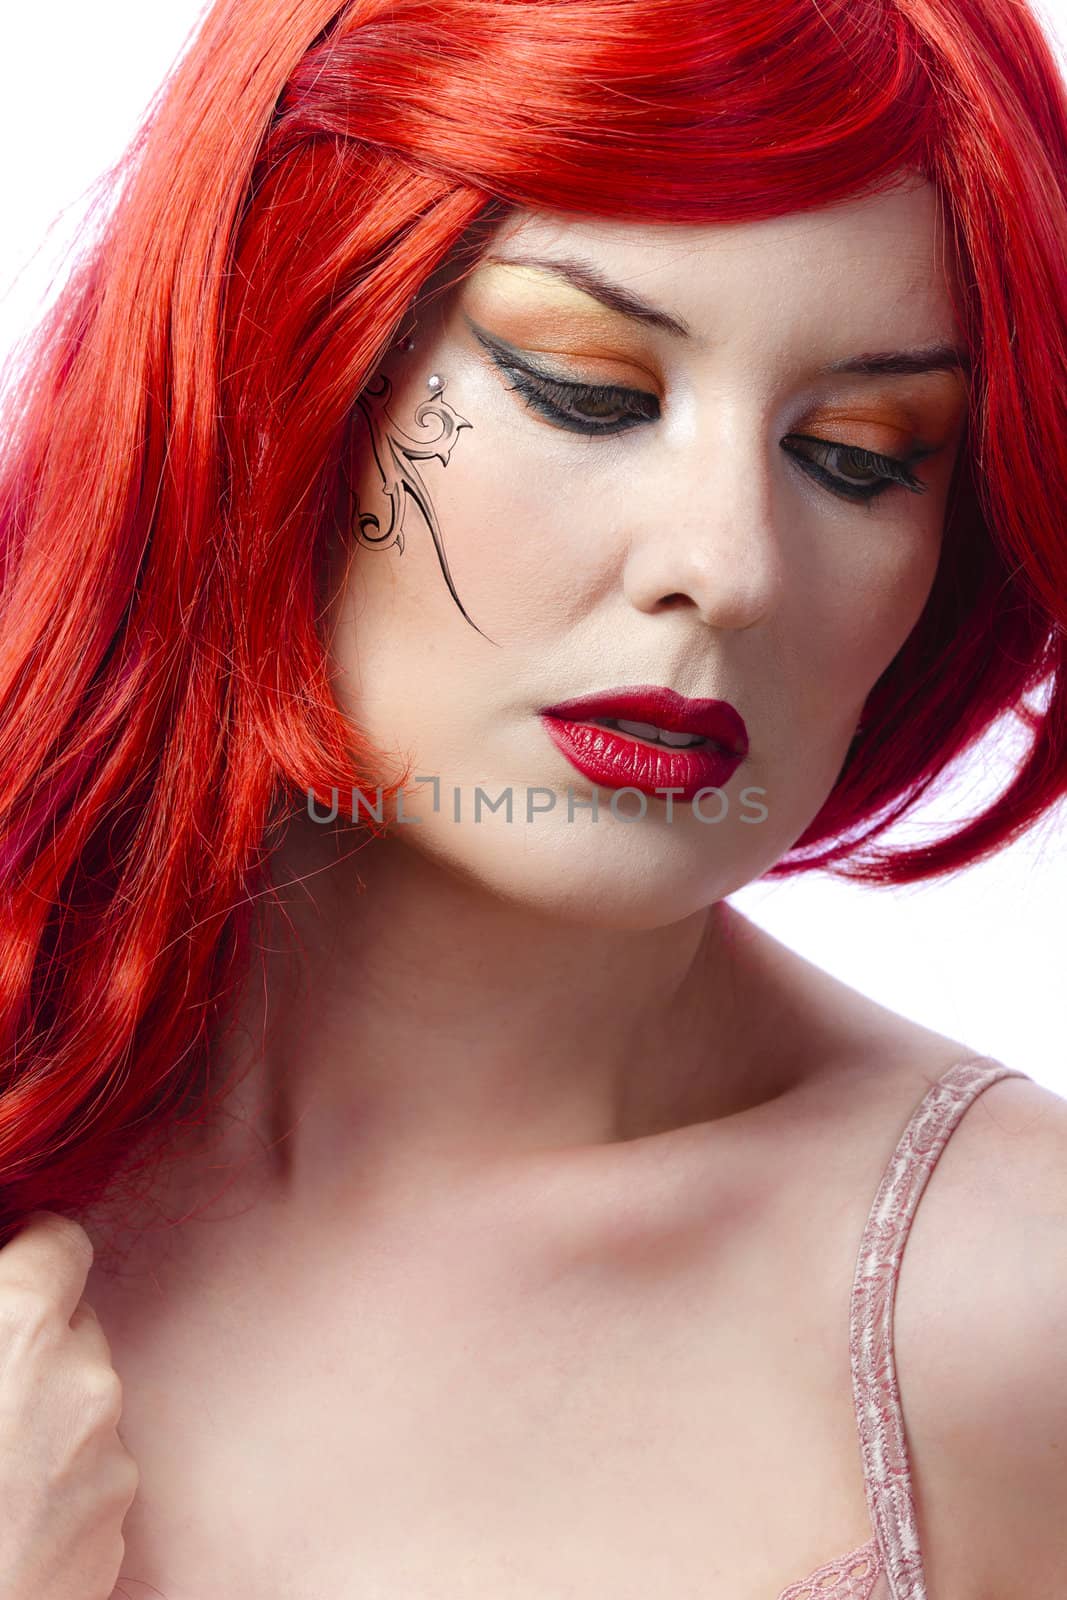 Red haired tattooed woman over white background